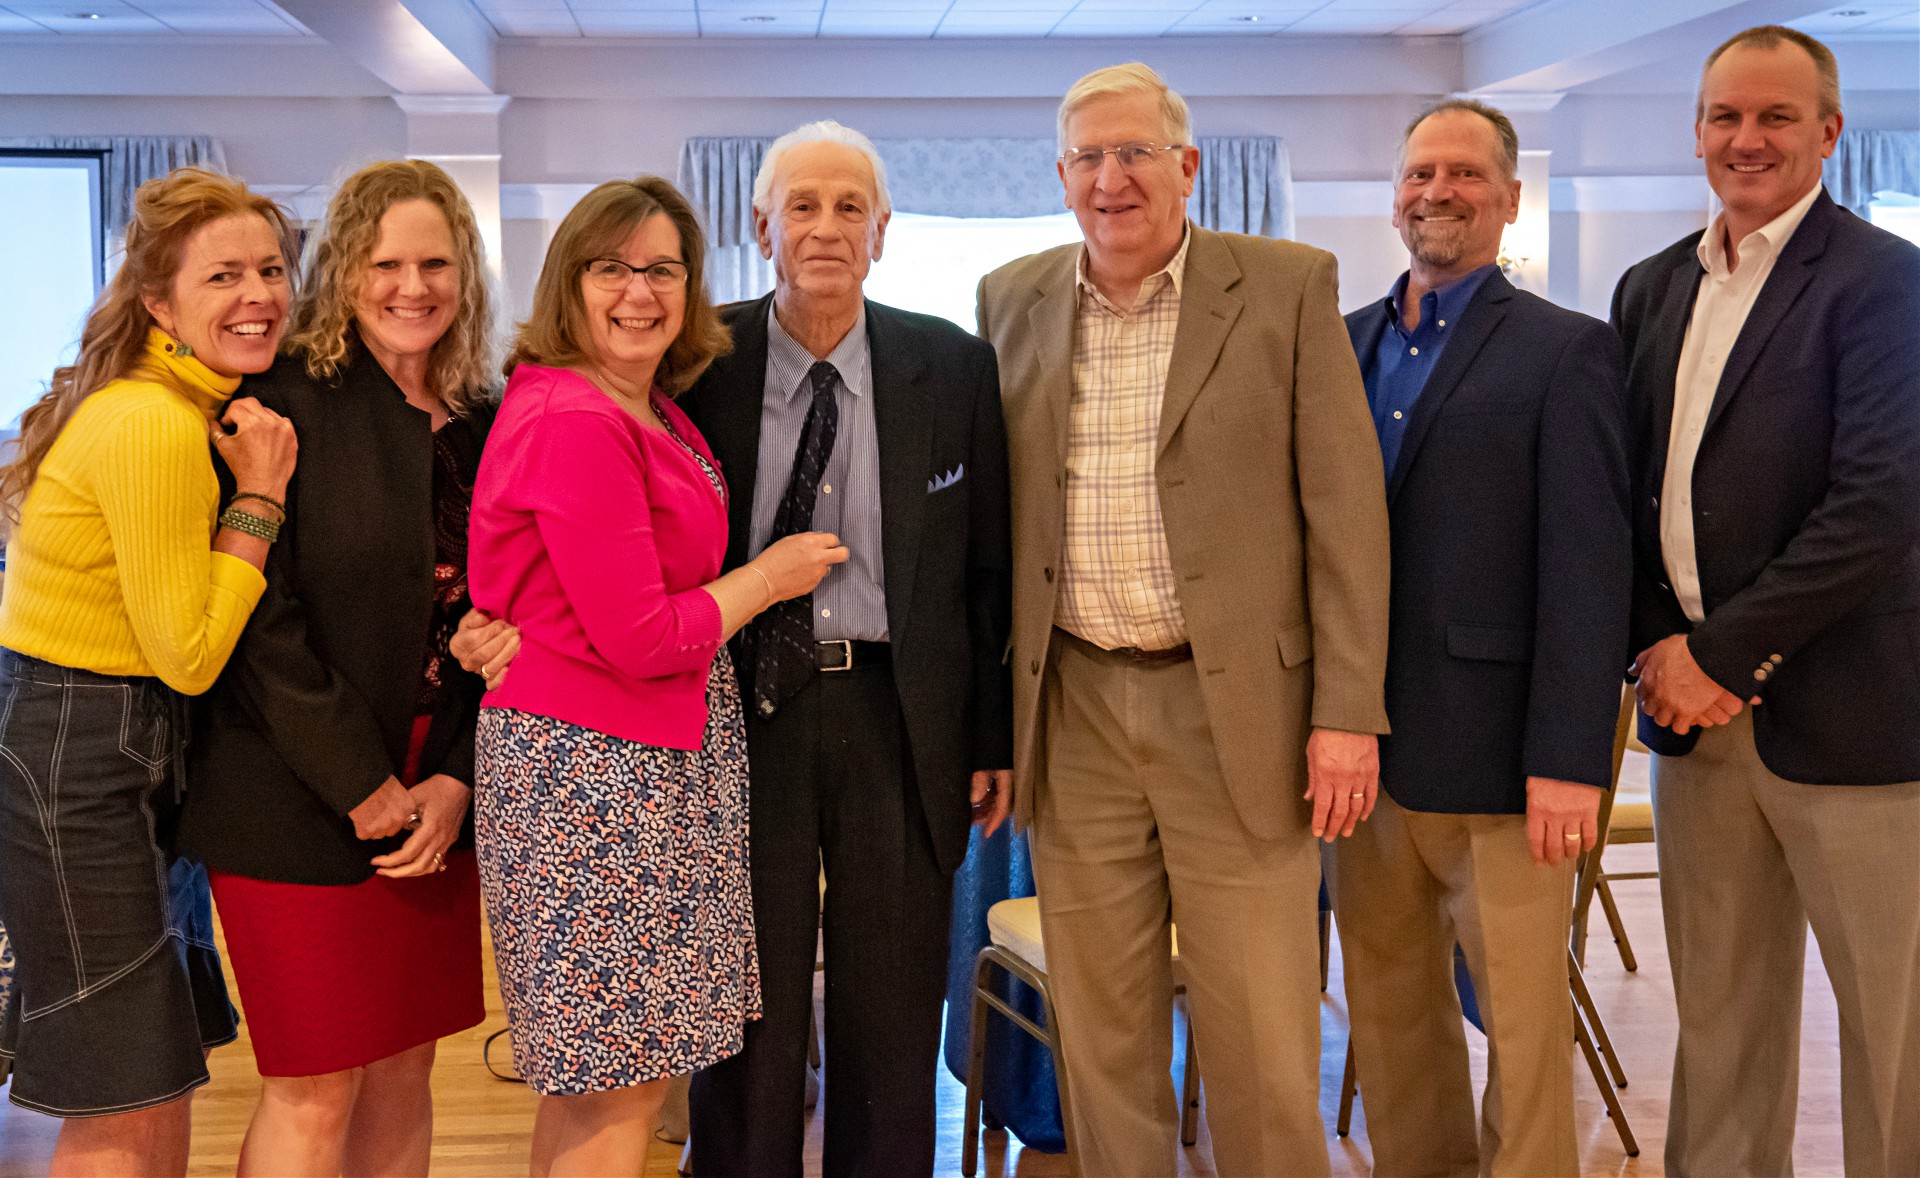 ?    ?Pictured (L to R) – Kelly Taylor, Shelly Stockmal, Leslie Unger (fixing Vince’s button), Vince Raffeo, Joe Guinta, Brian Meyer, and Robert Shultz, all from The Victory Bank. *Thanks to Victory’s Bill Vitiello (not pictured), who took the photo!